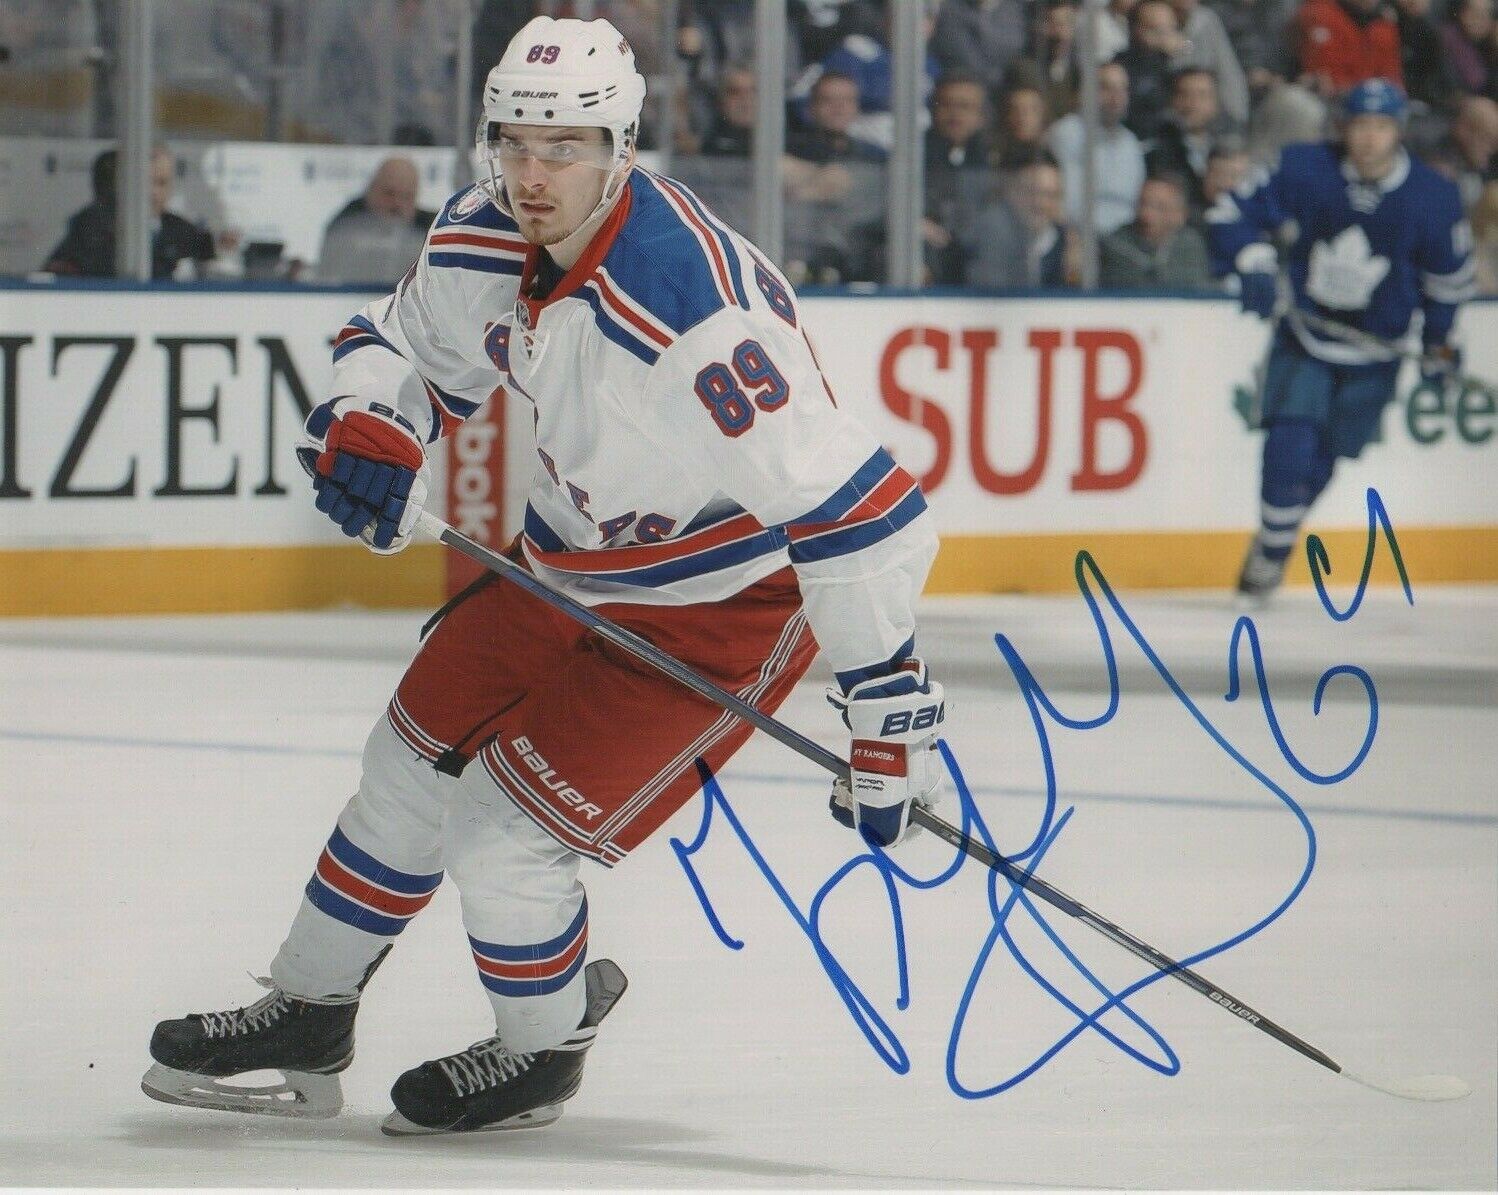 New York Rangers Pavel Buchnevich Autographed Signed 8x10 NHL Photo Poster painting COA #6